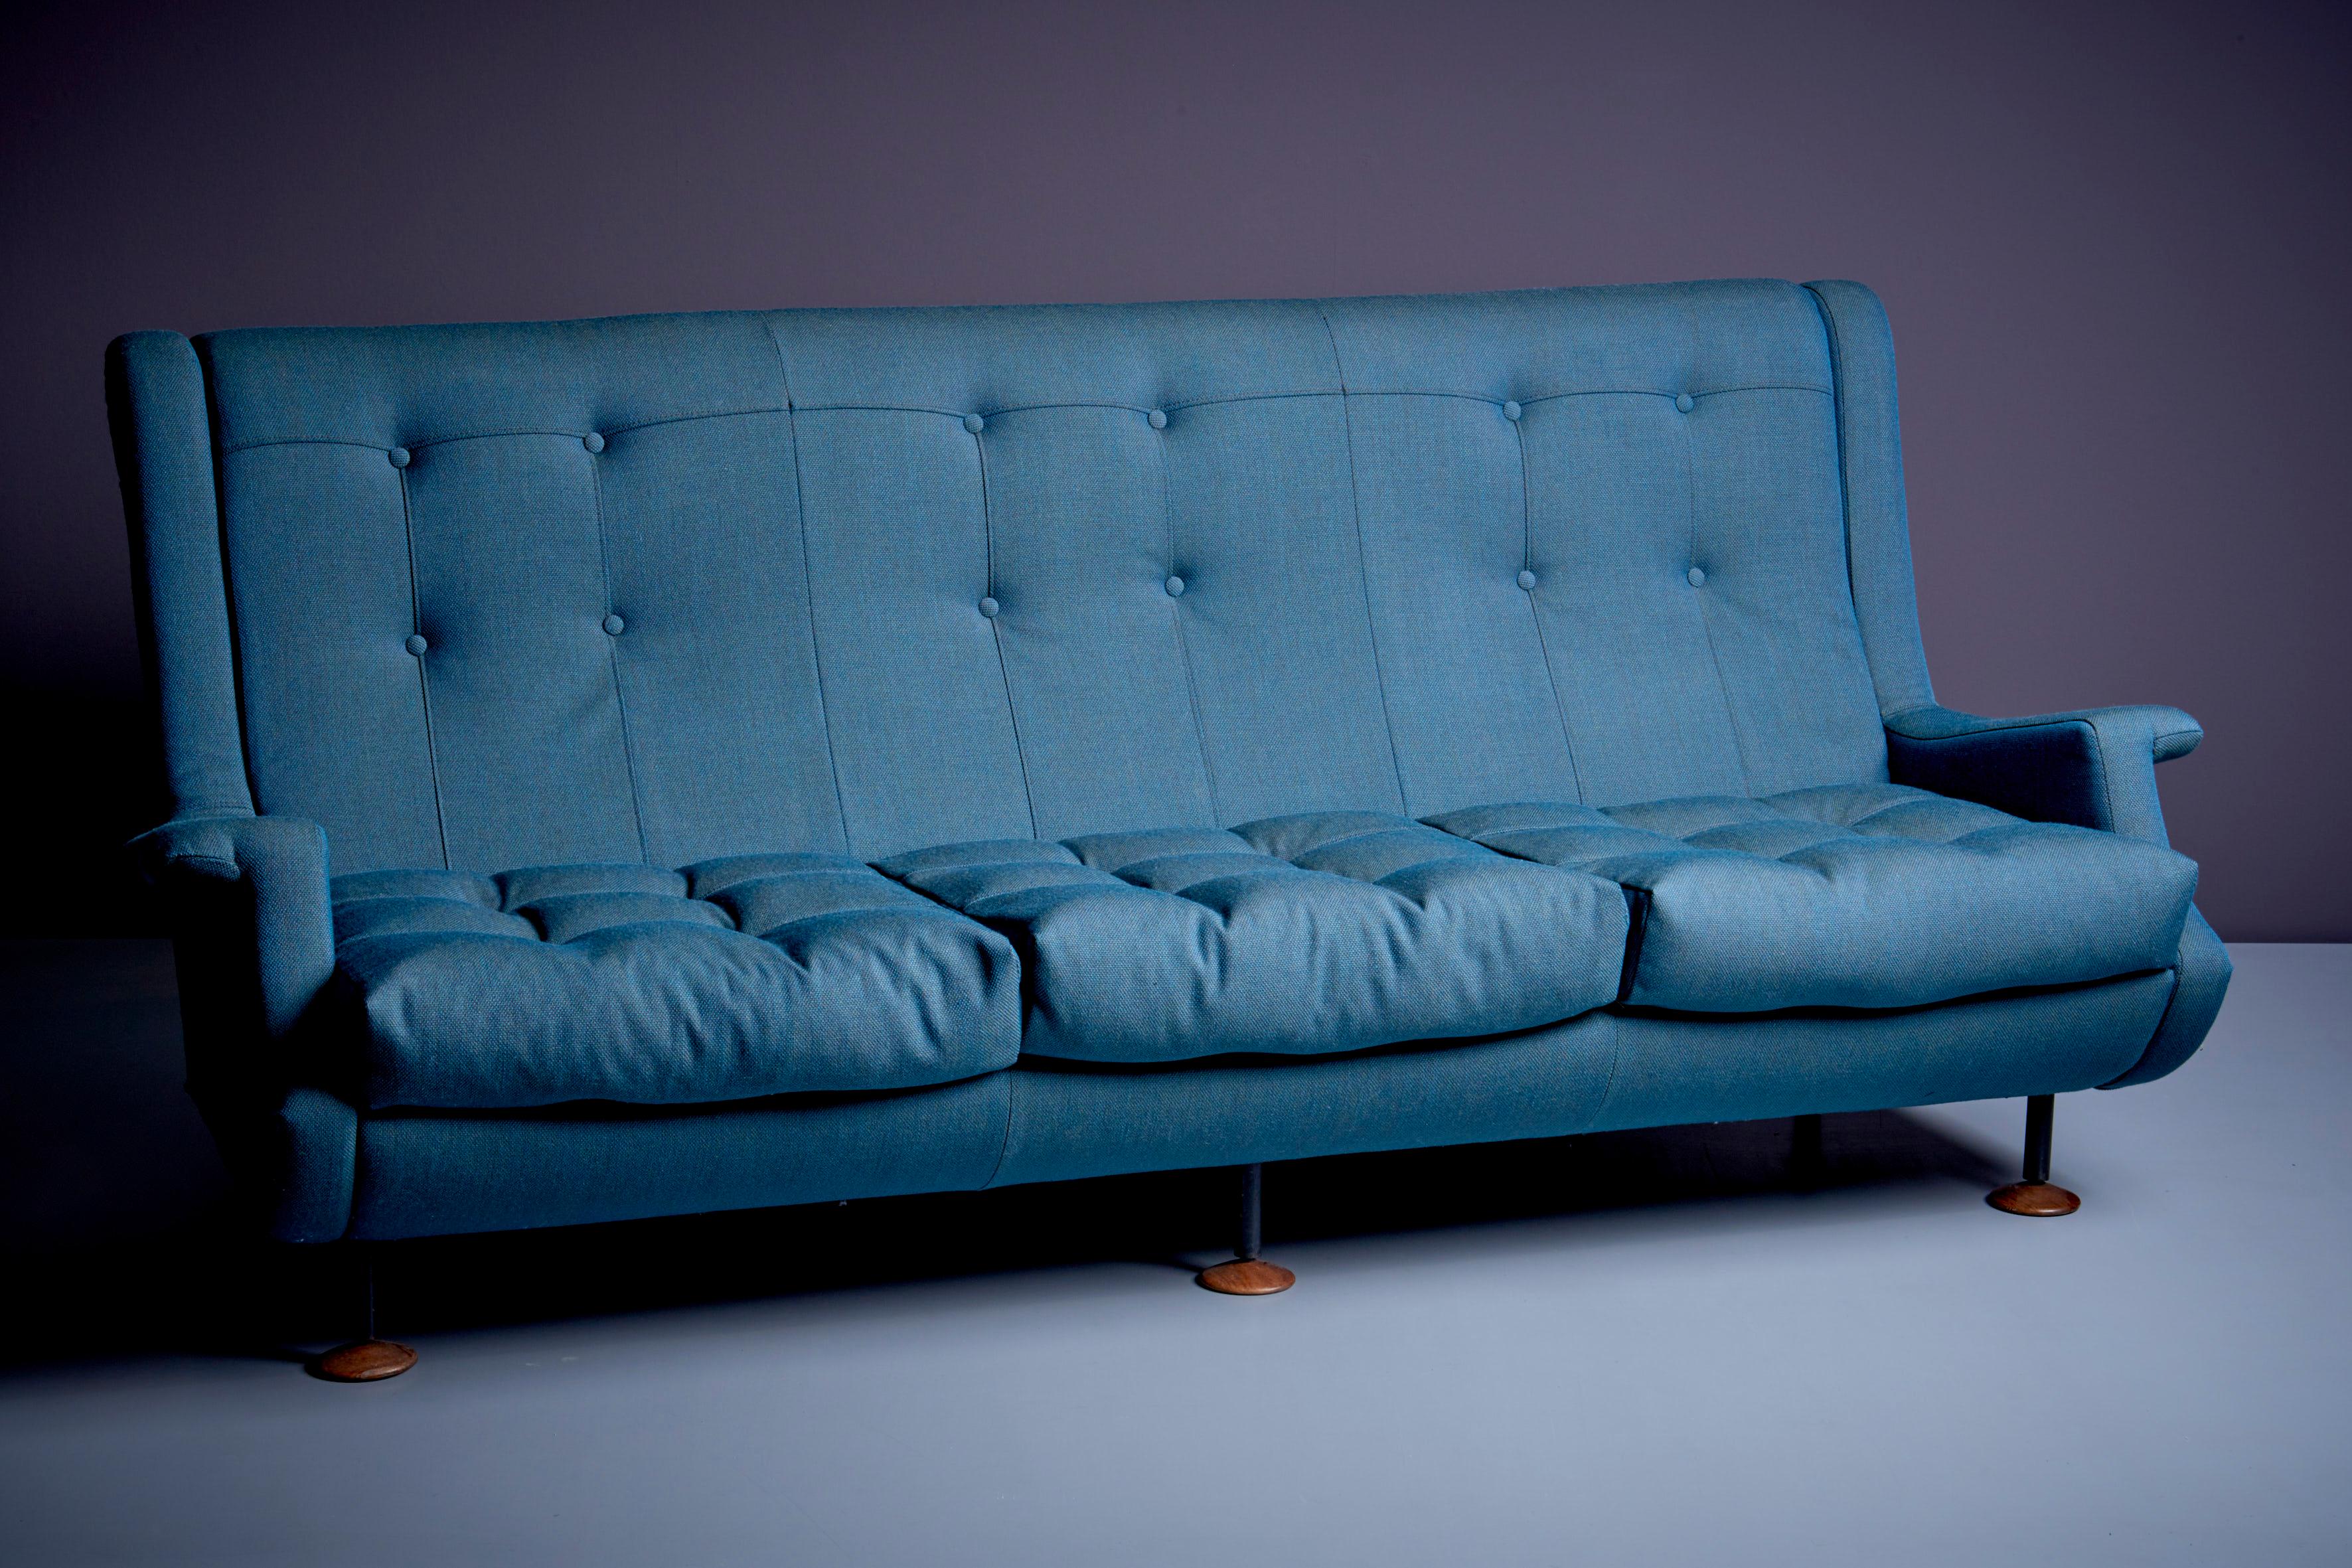 1 of 2 Newly Upholstered Regent Sofa by Marco Zanuso for Arflex in Petrol Color  For Sale 4